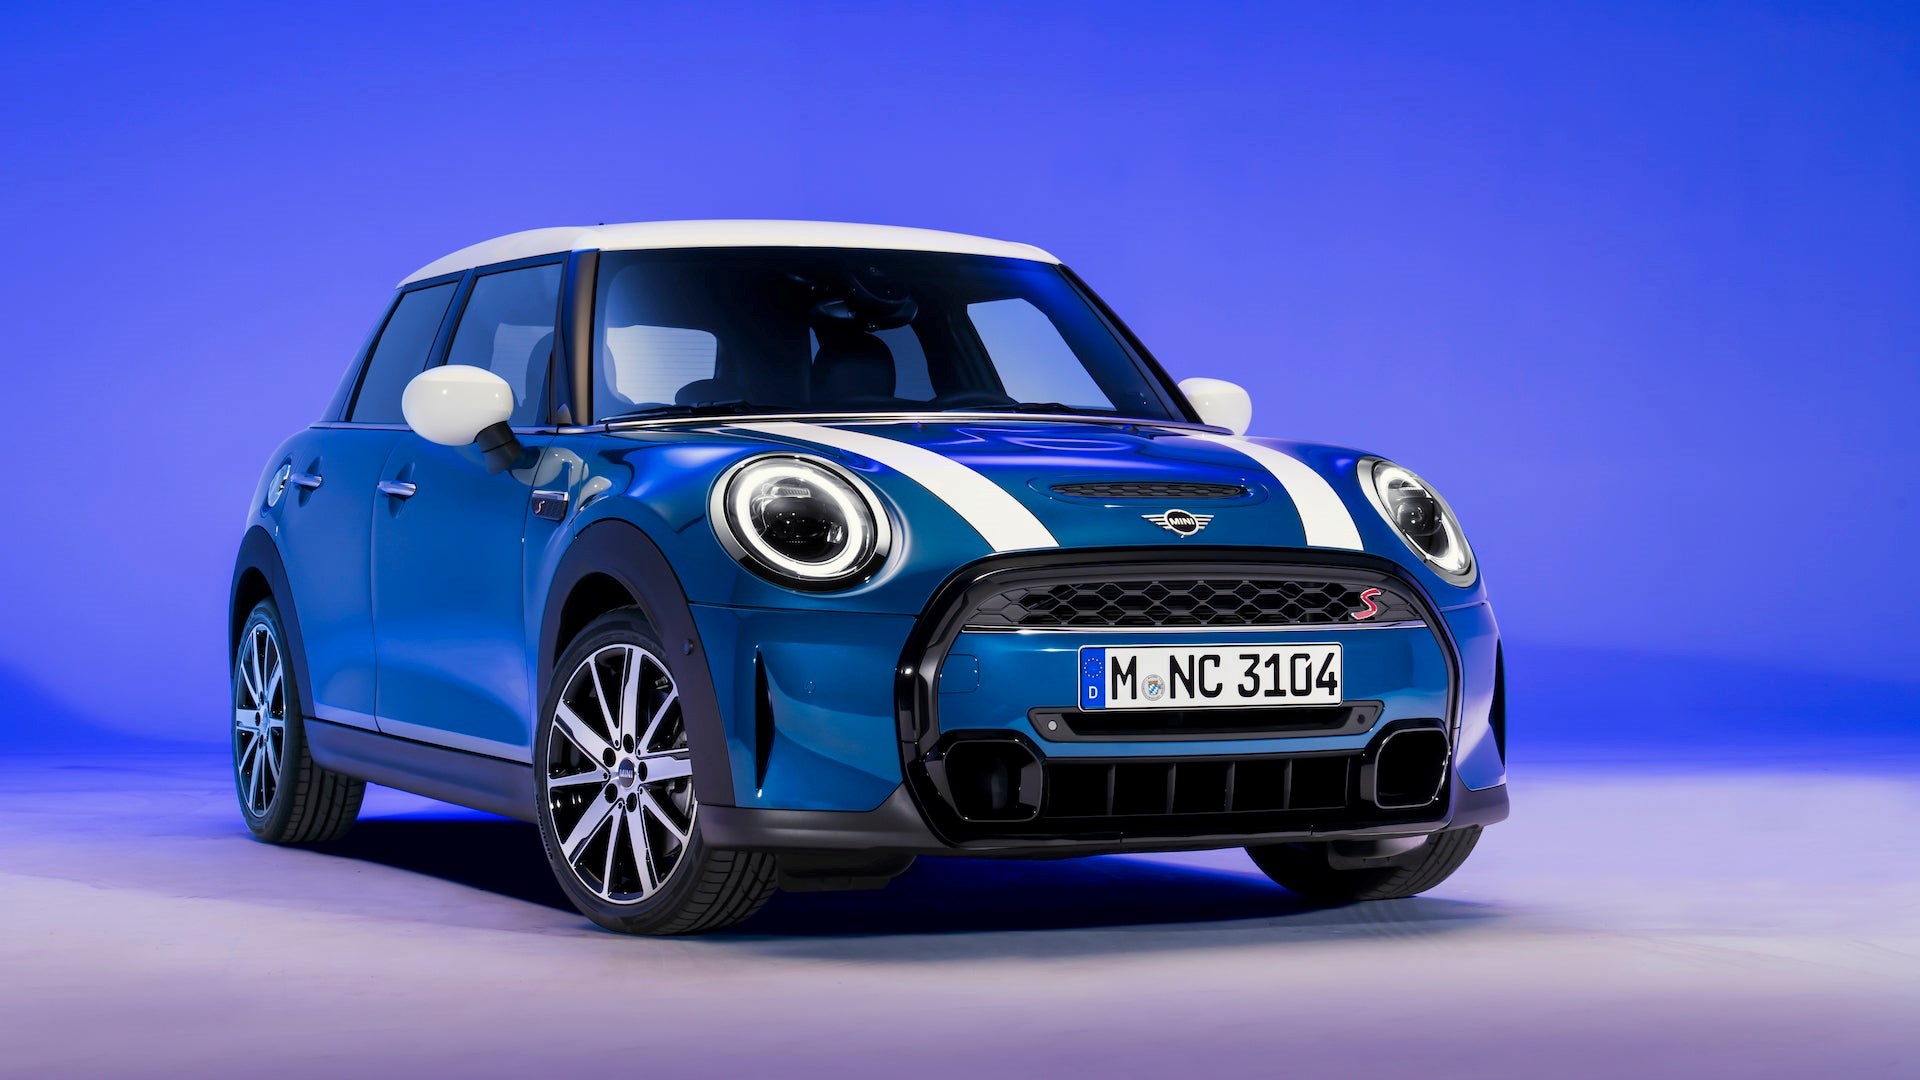 It's back: Mini unveils new Cooper Hatch and Convertible mod - Driven ...